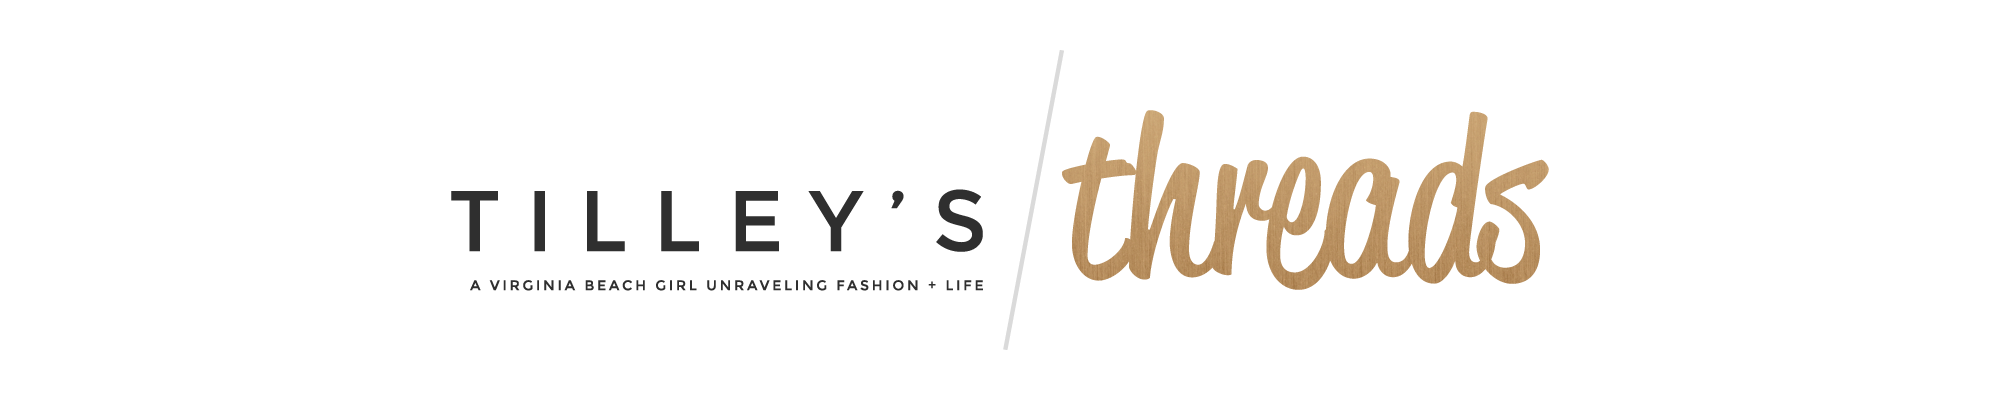 Tilley's Threads  A Virginia Beach Girl Unraveling Fashion, Life